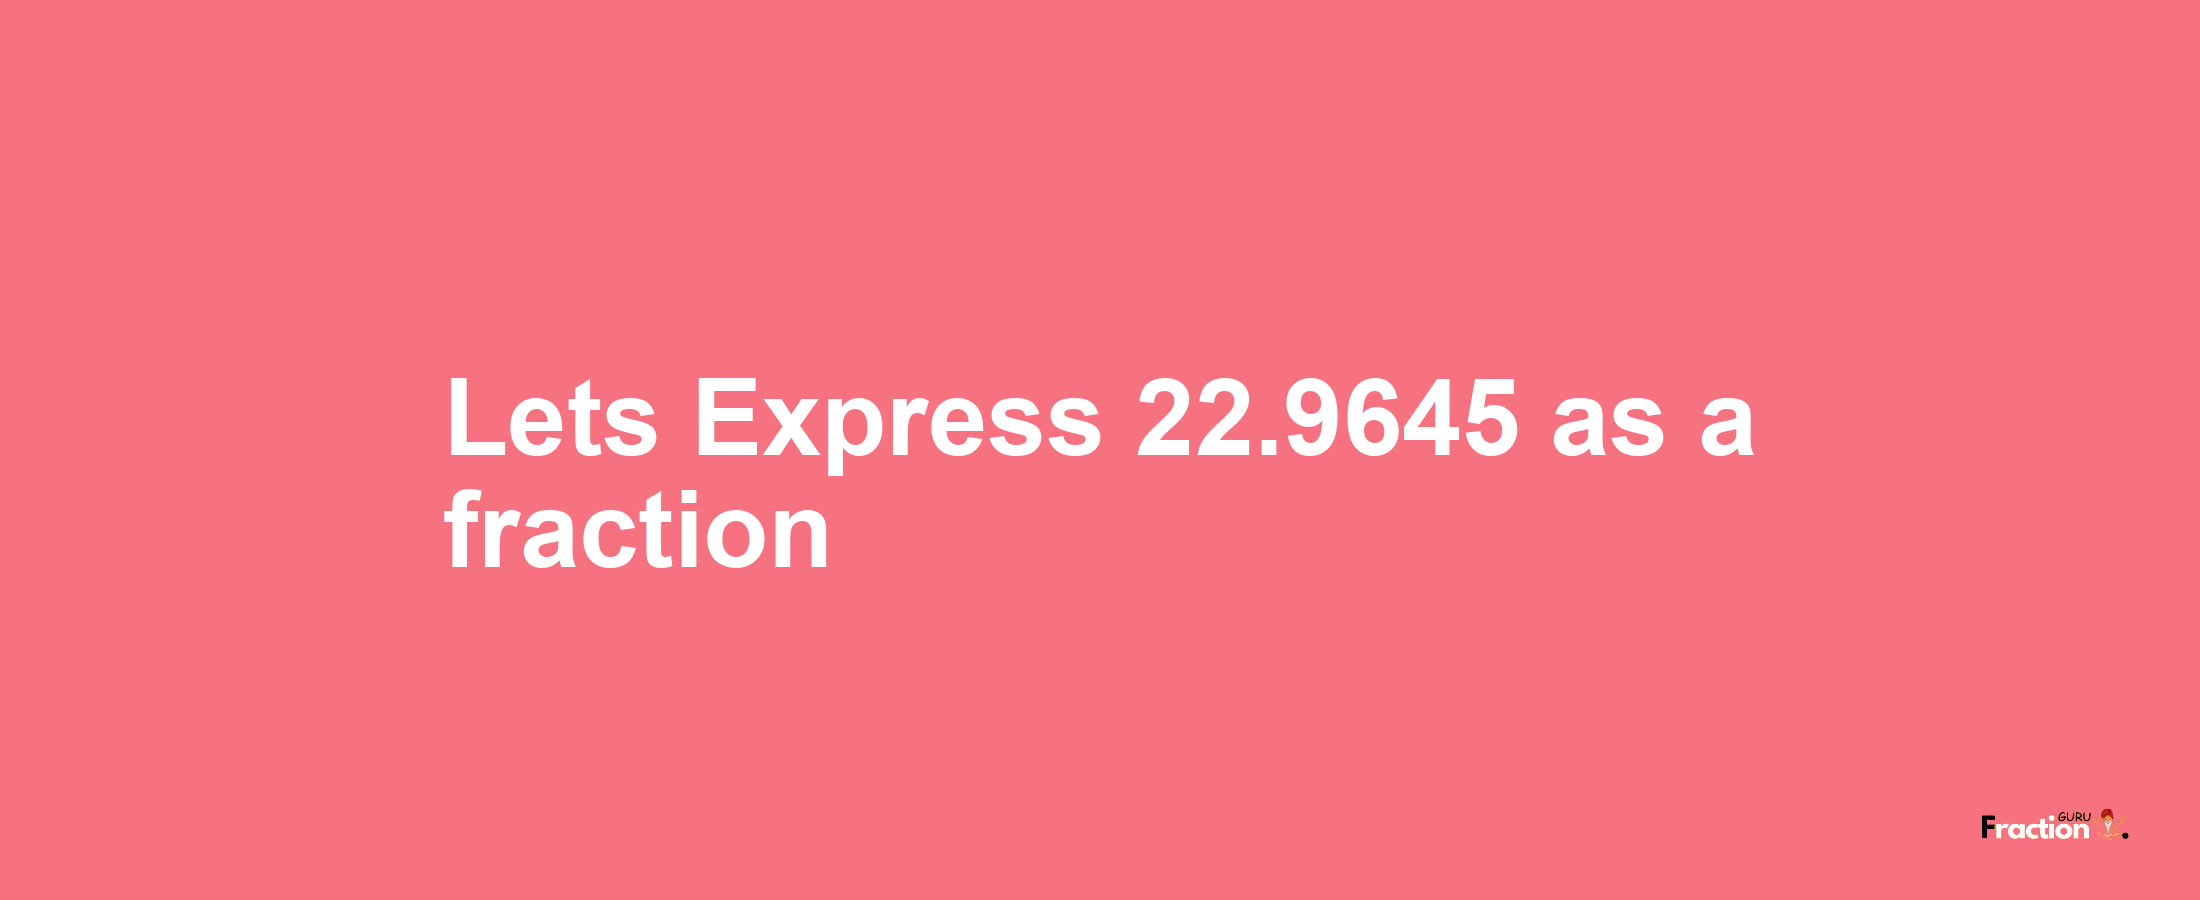 Lets Express 22.9645 as afraction